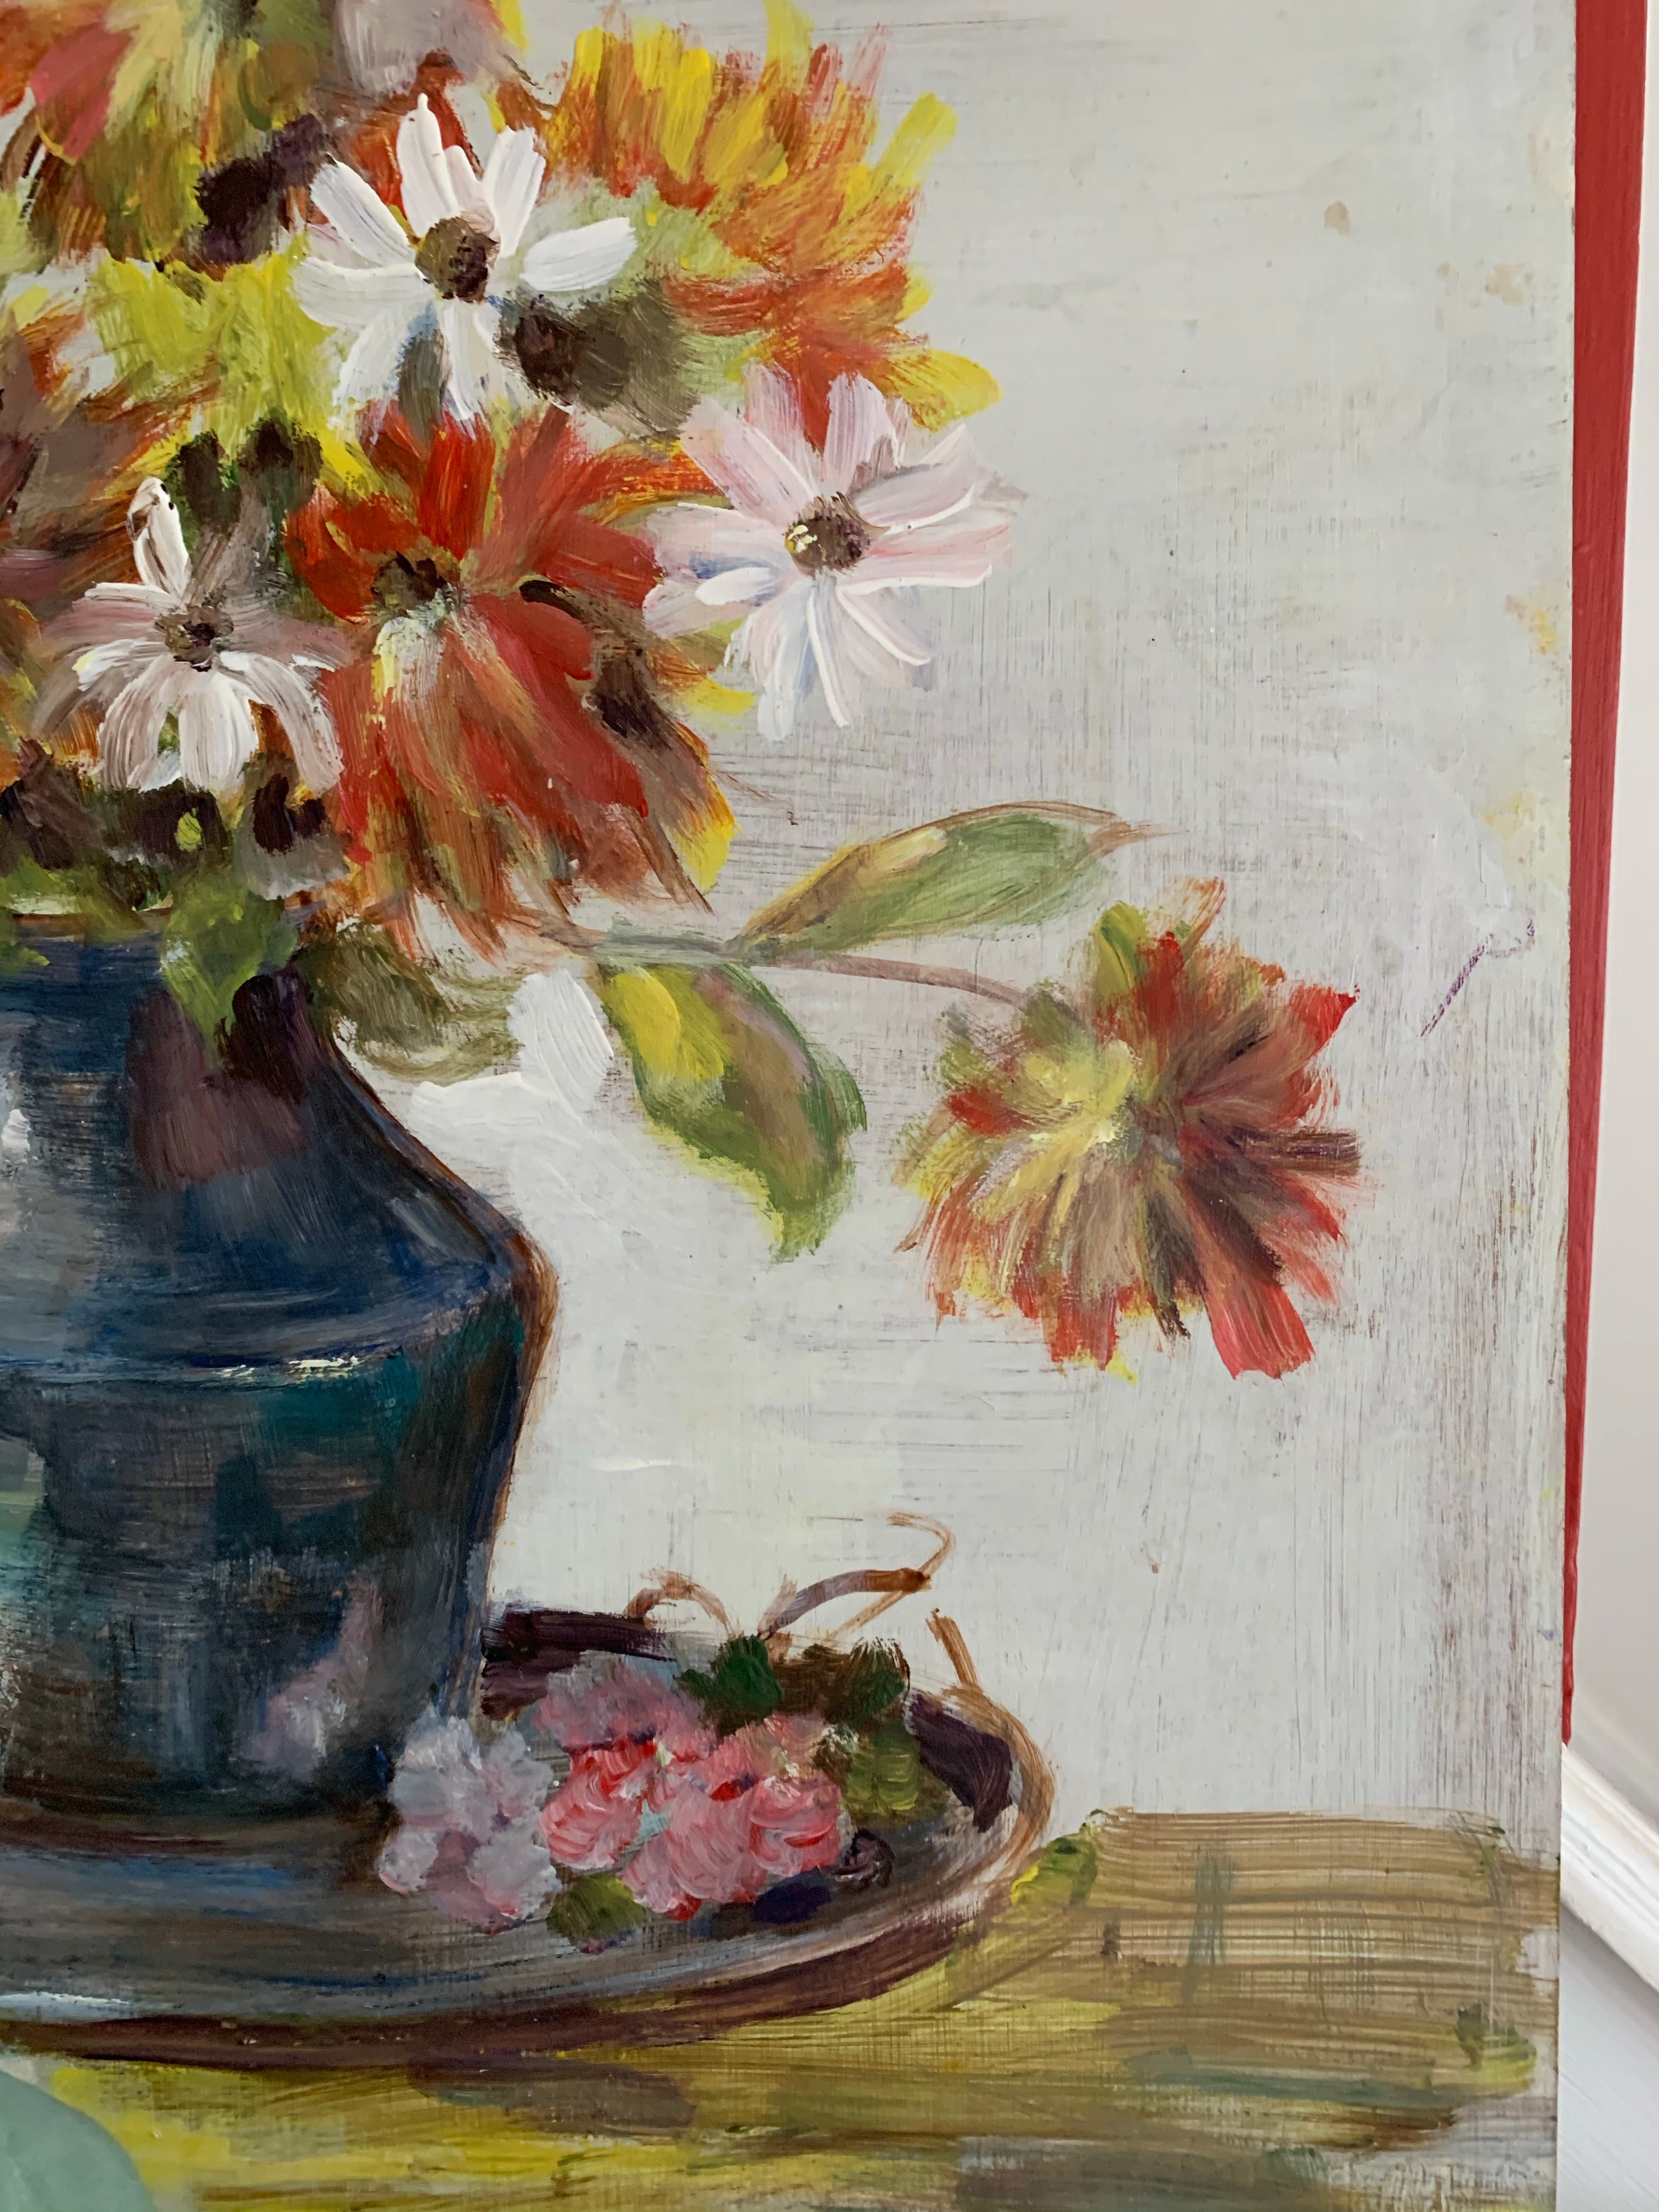 Floral Still-Life with Blue Jug and Plate - Vintage Oil on Board